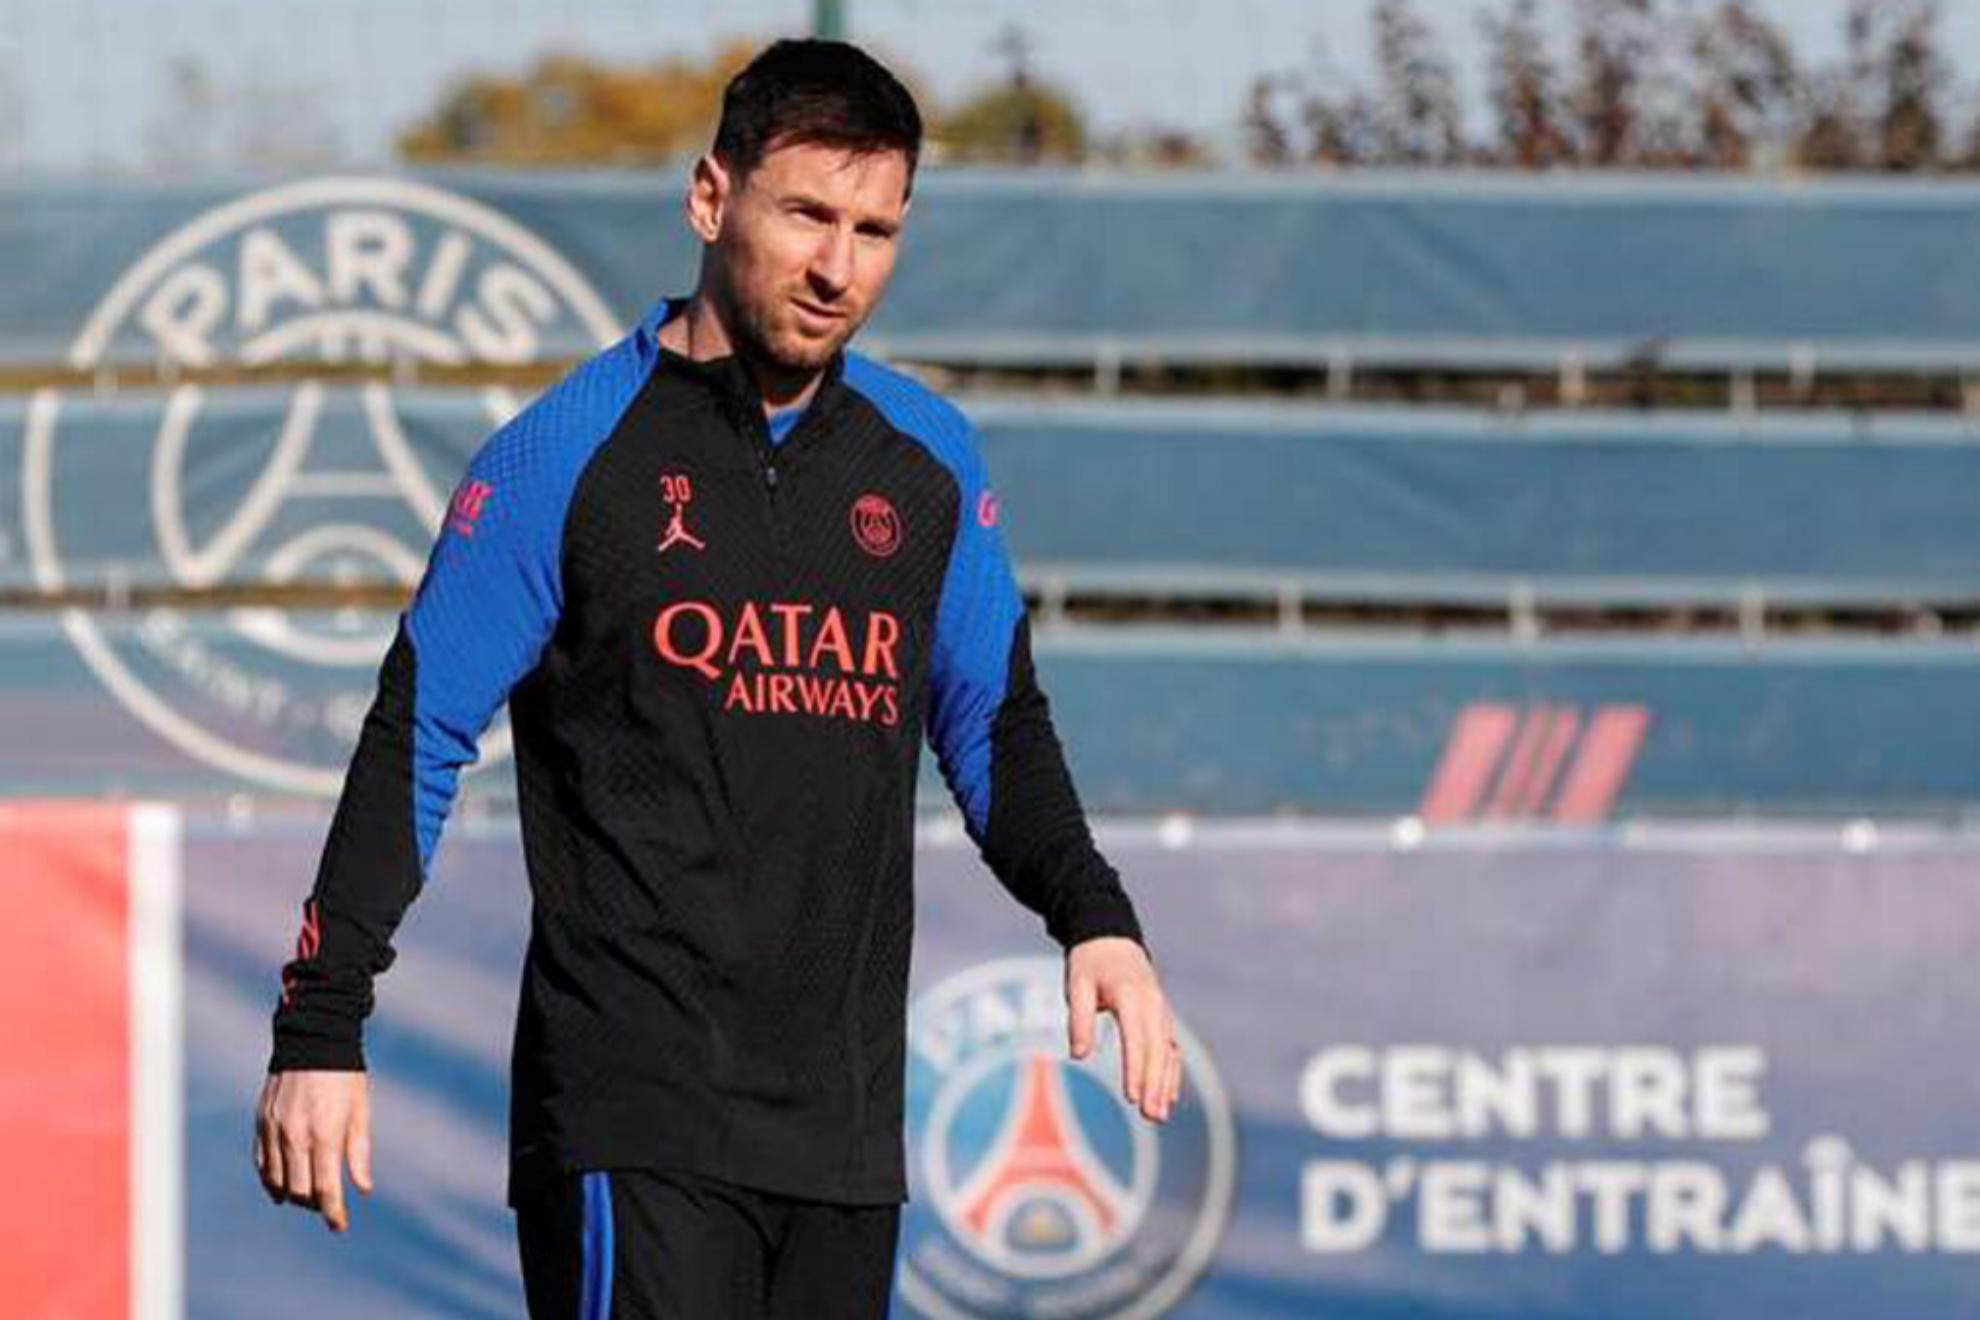 Messi parks the World Cup and will play for PSG